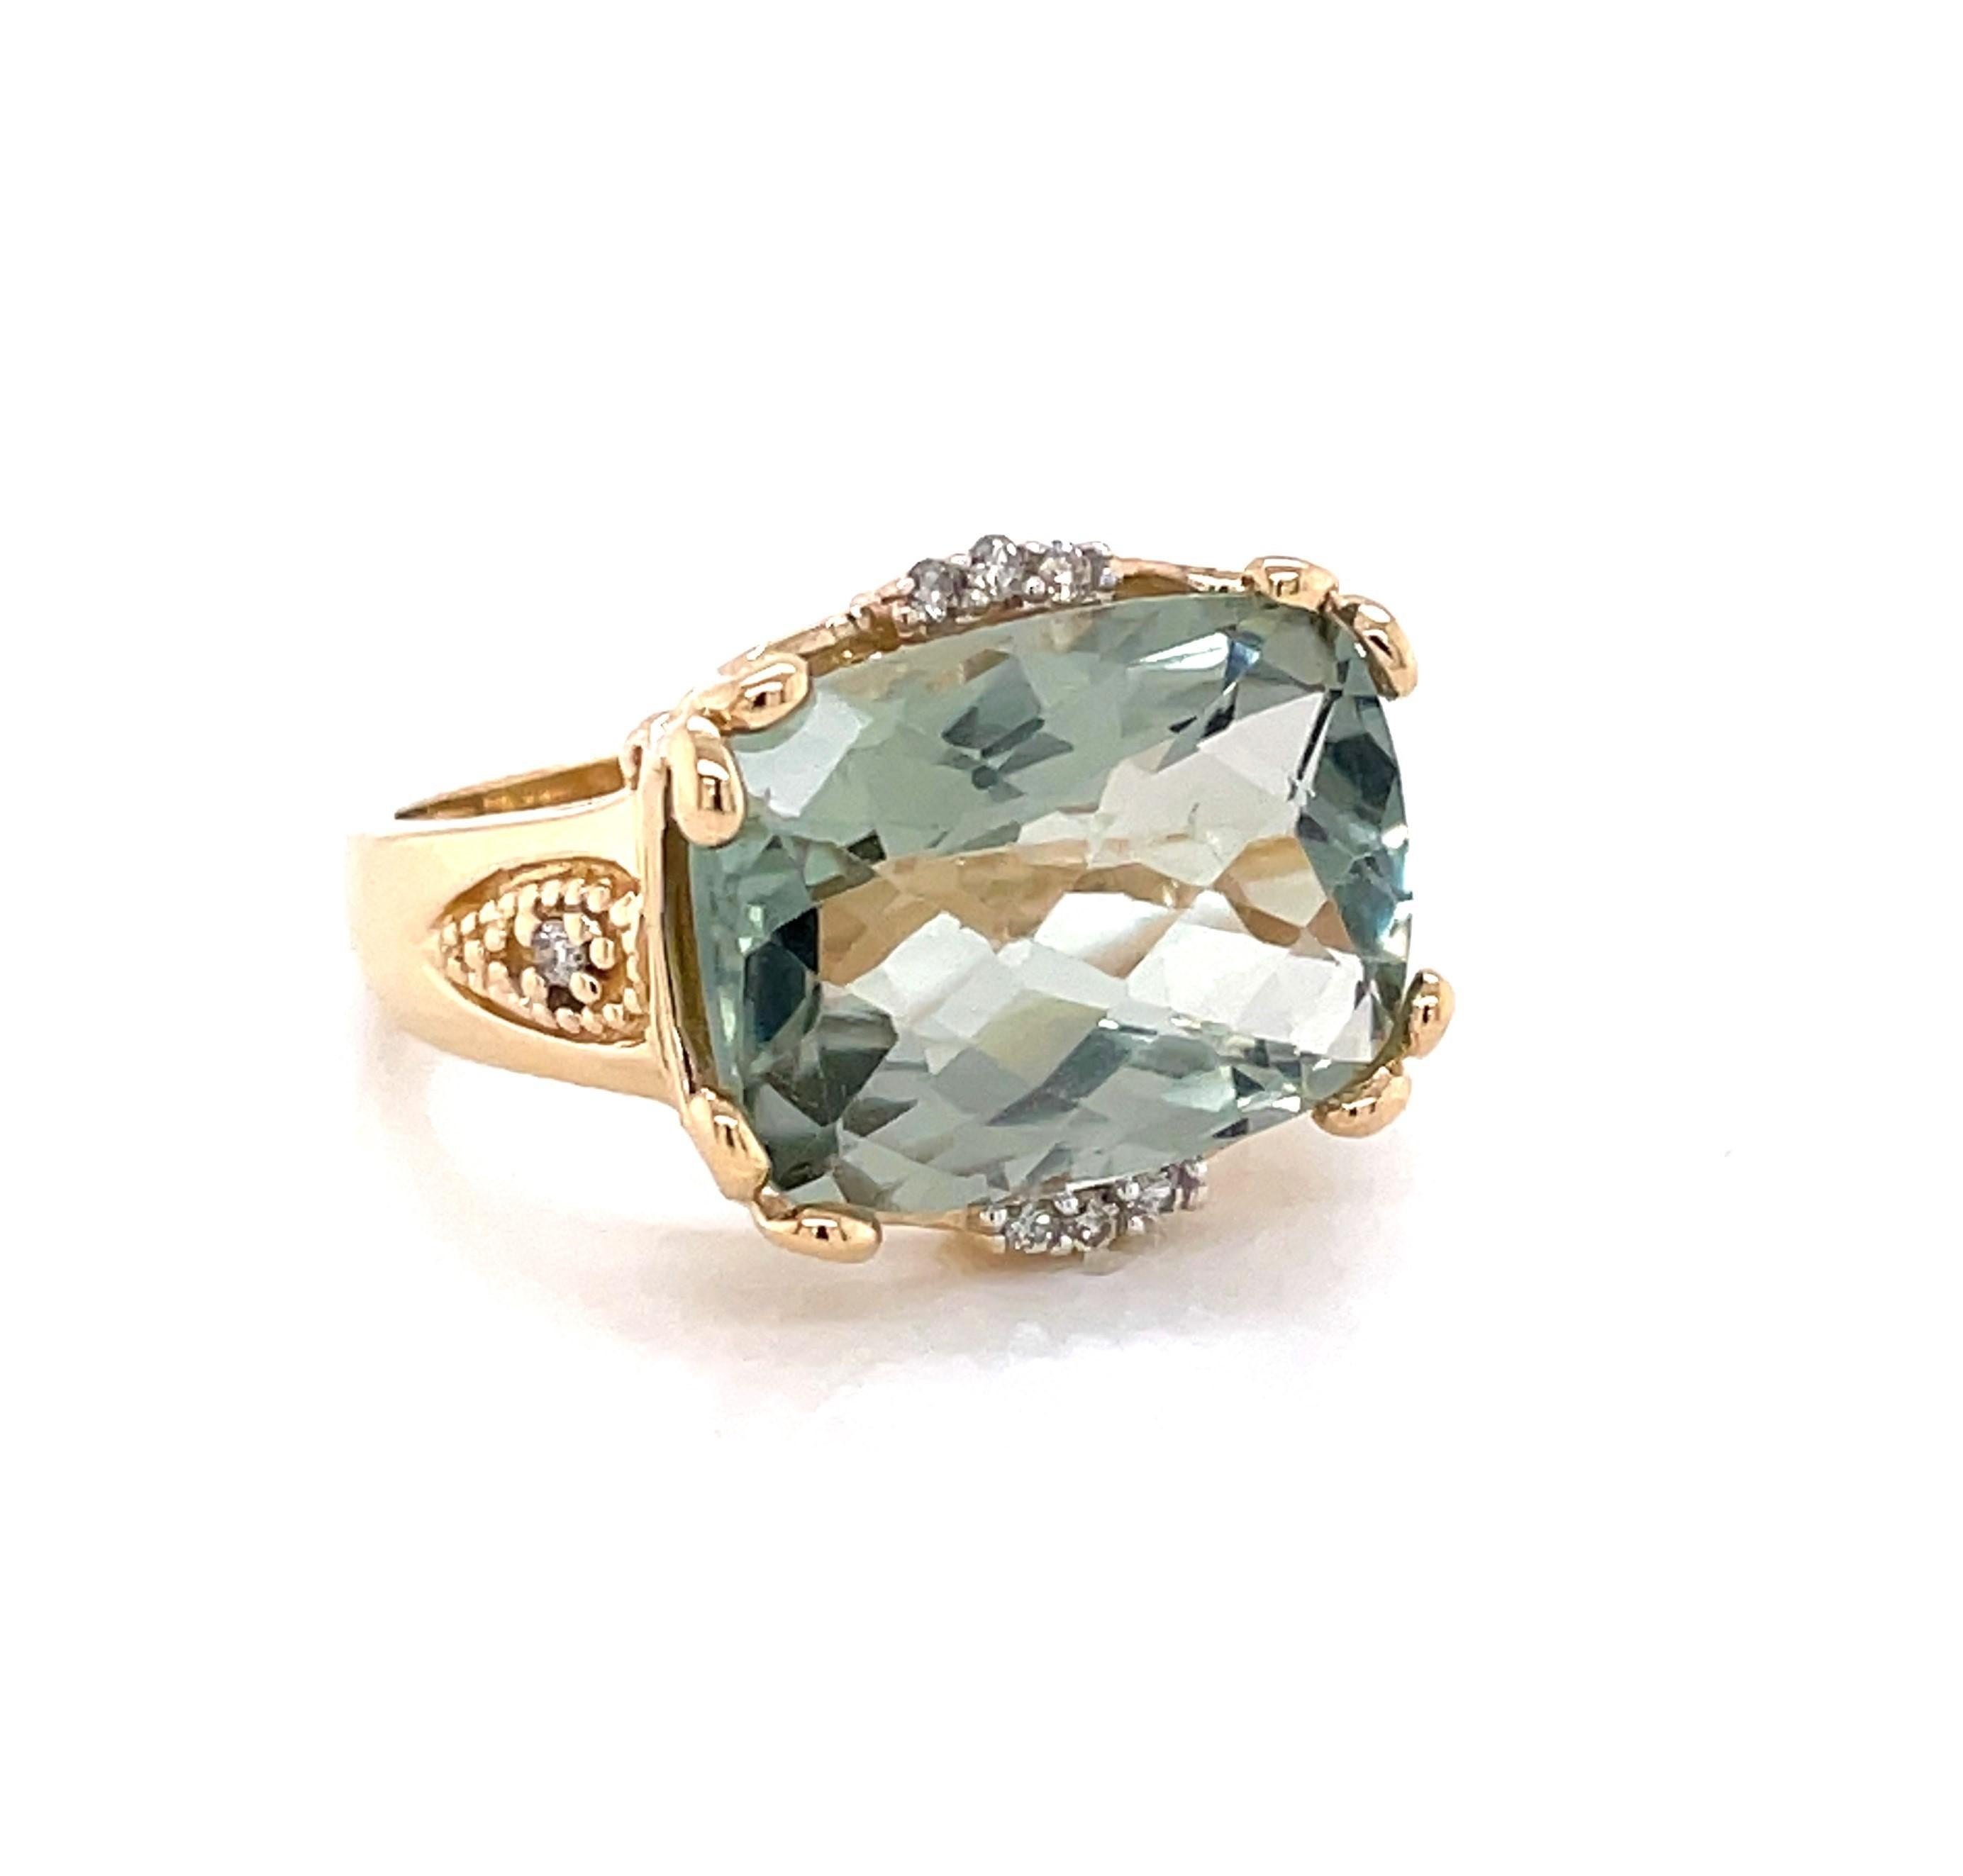 5 Carat Green Amethyst 14 Karat Cocktail Ring with Diamond Accents 5